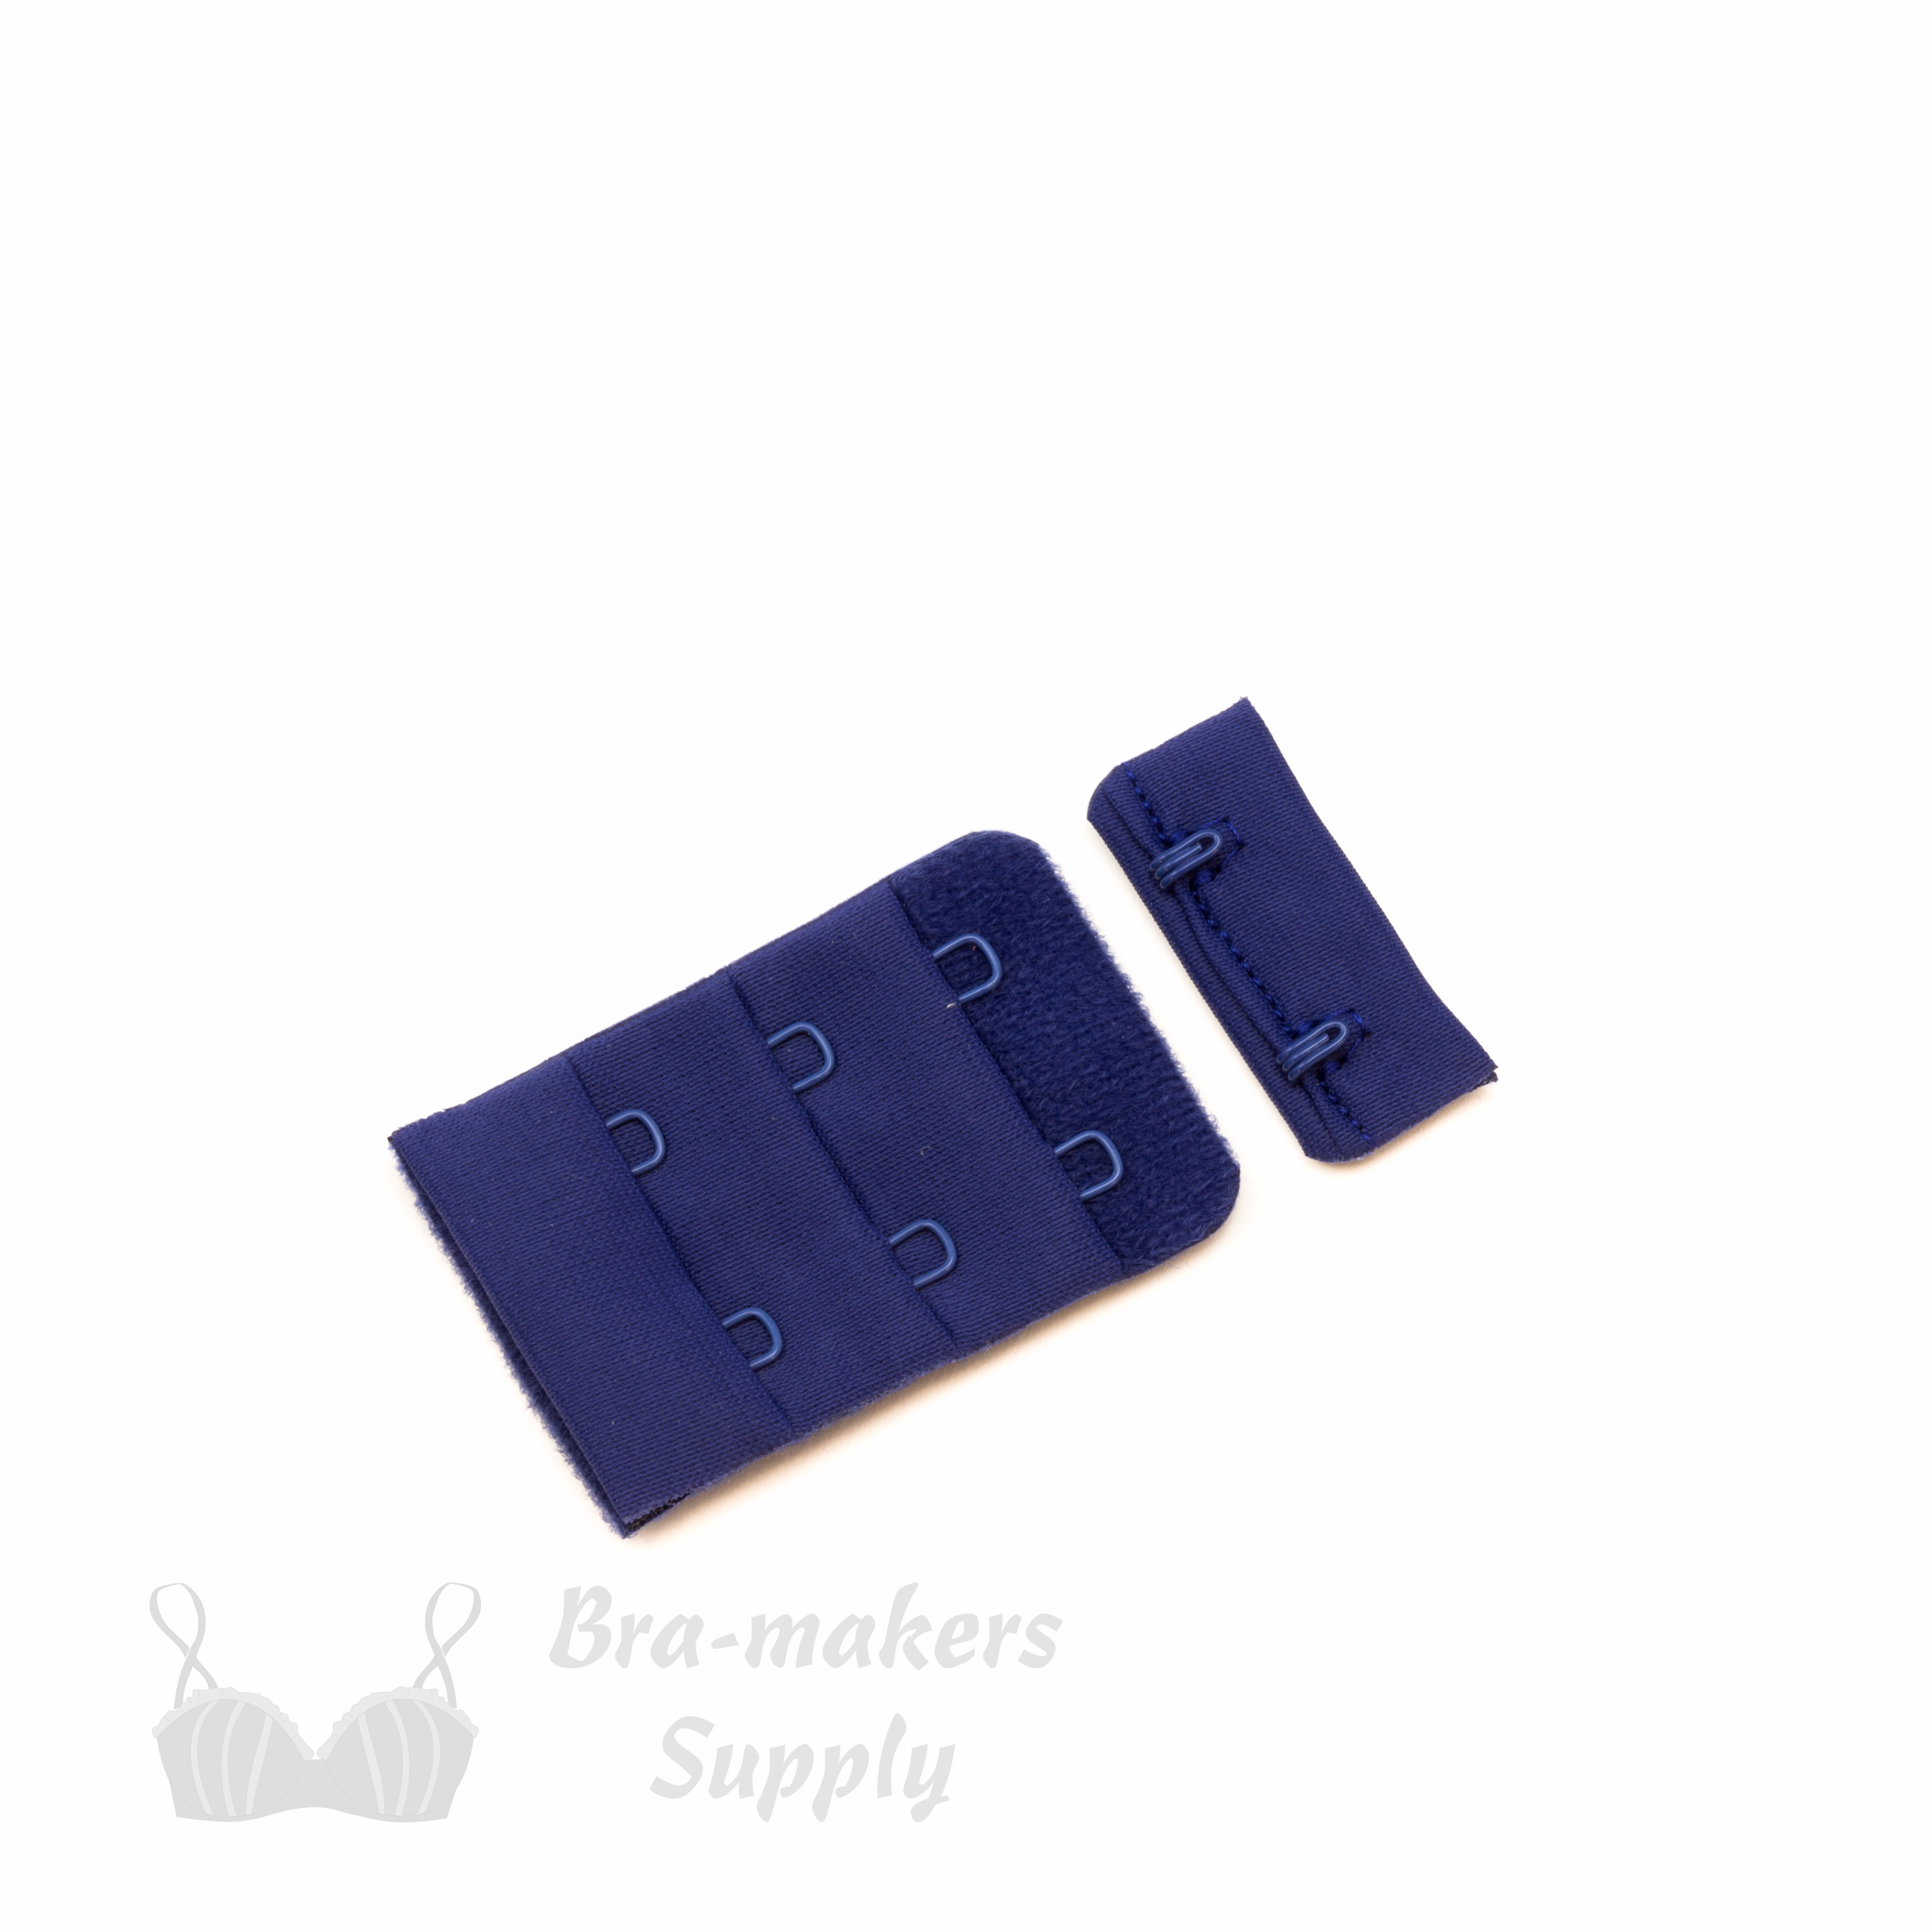 2x3 bra hook and eye navy blue HS-23 or 2x3 hook and eye back closures blueprint Pantone 19-3939 from Bra-Makers Supply front shown